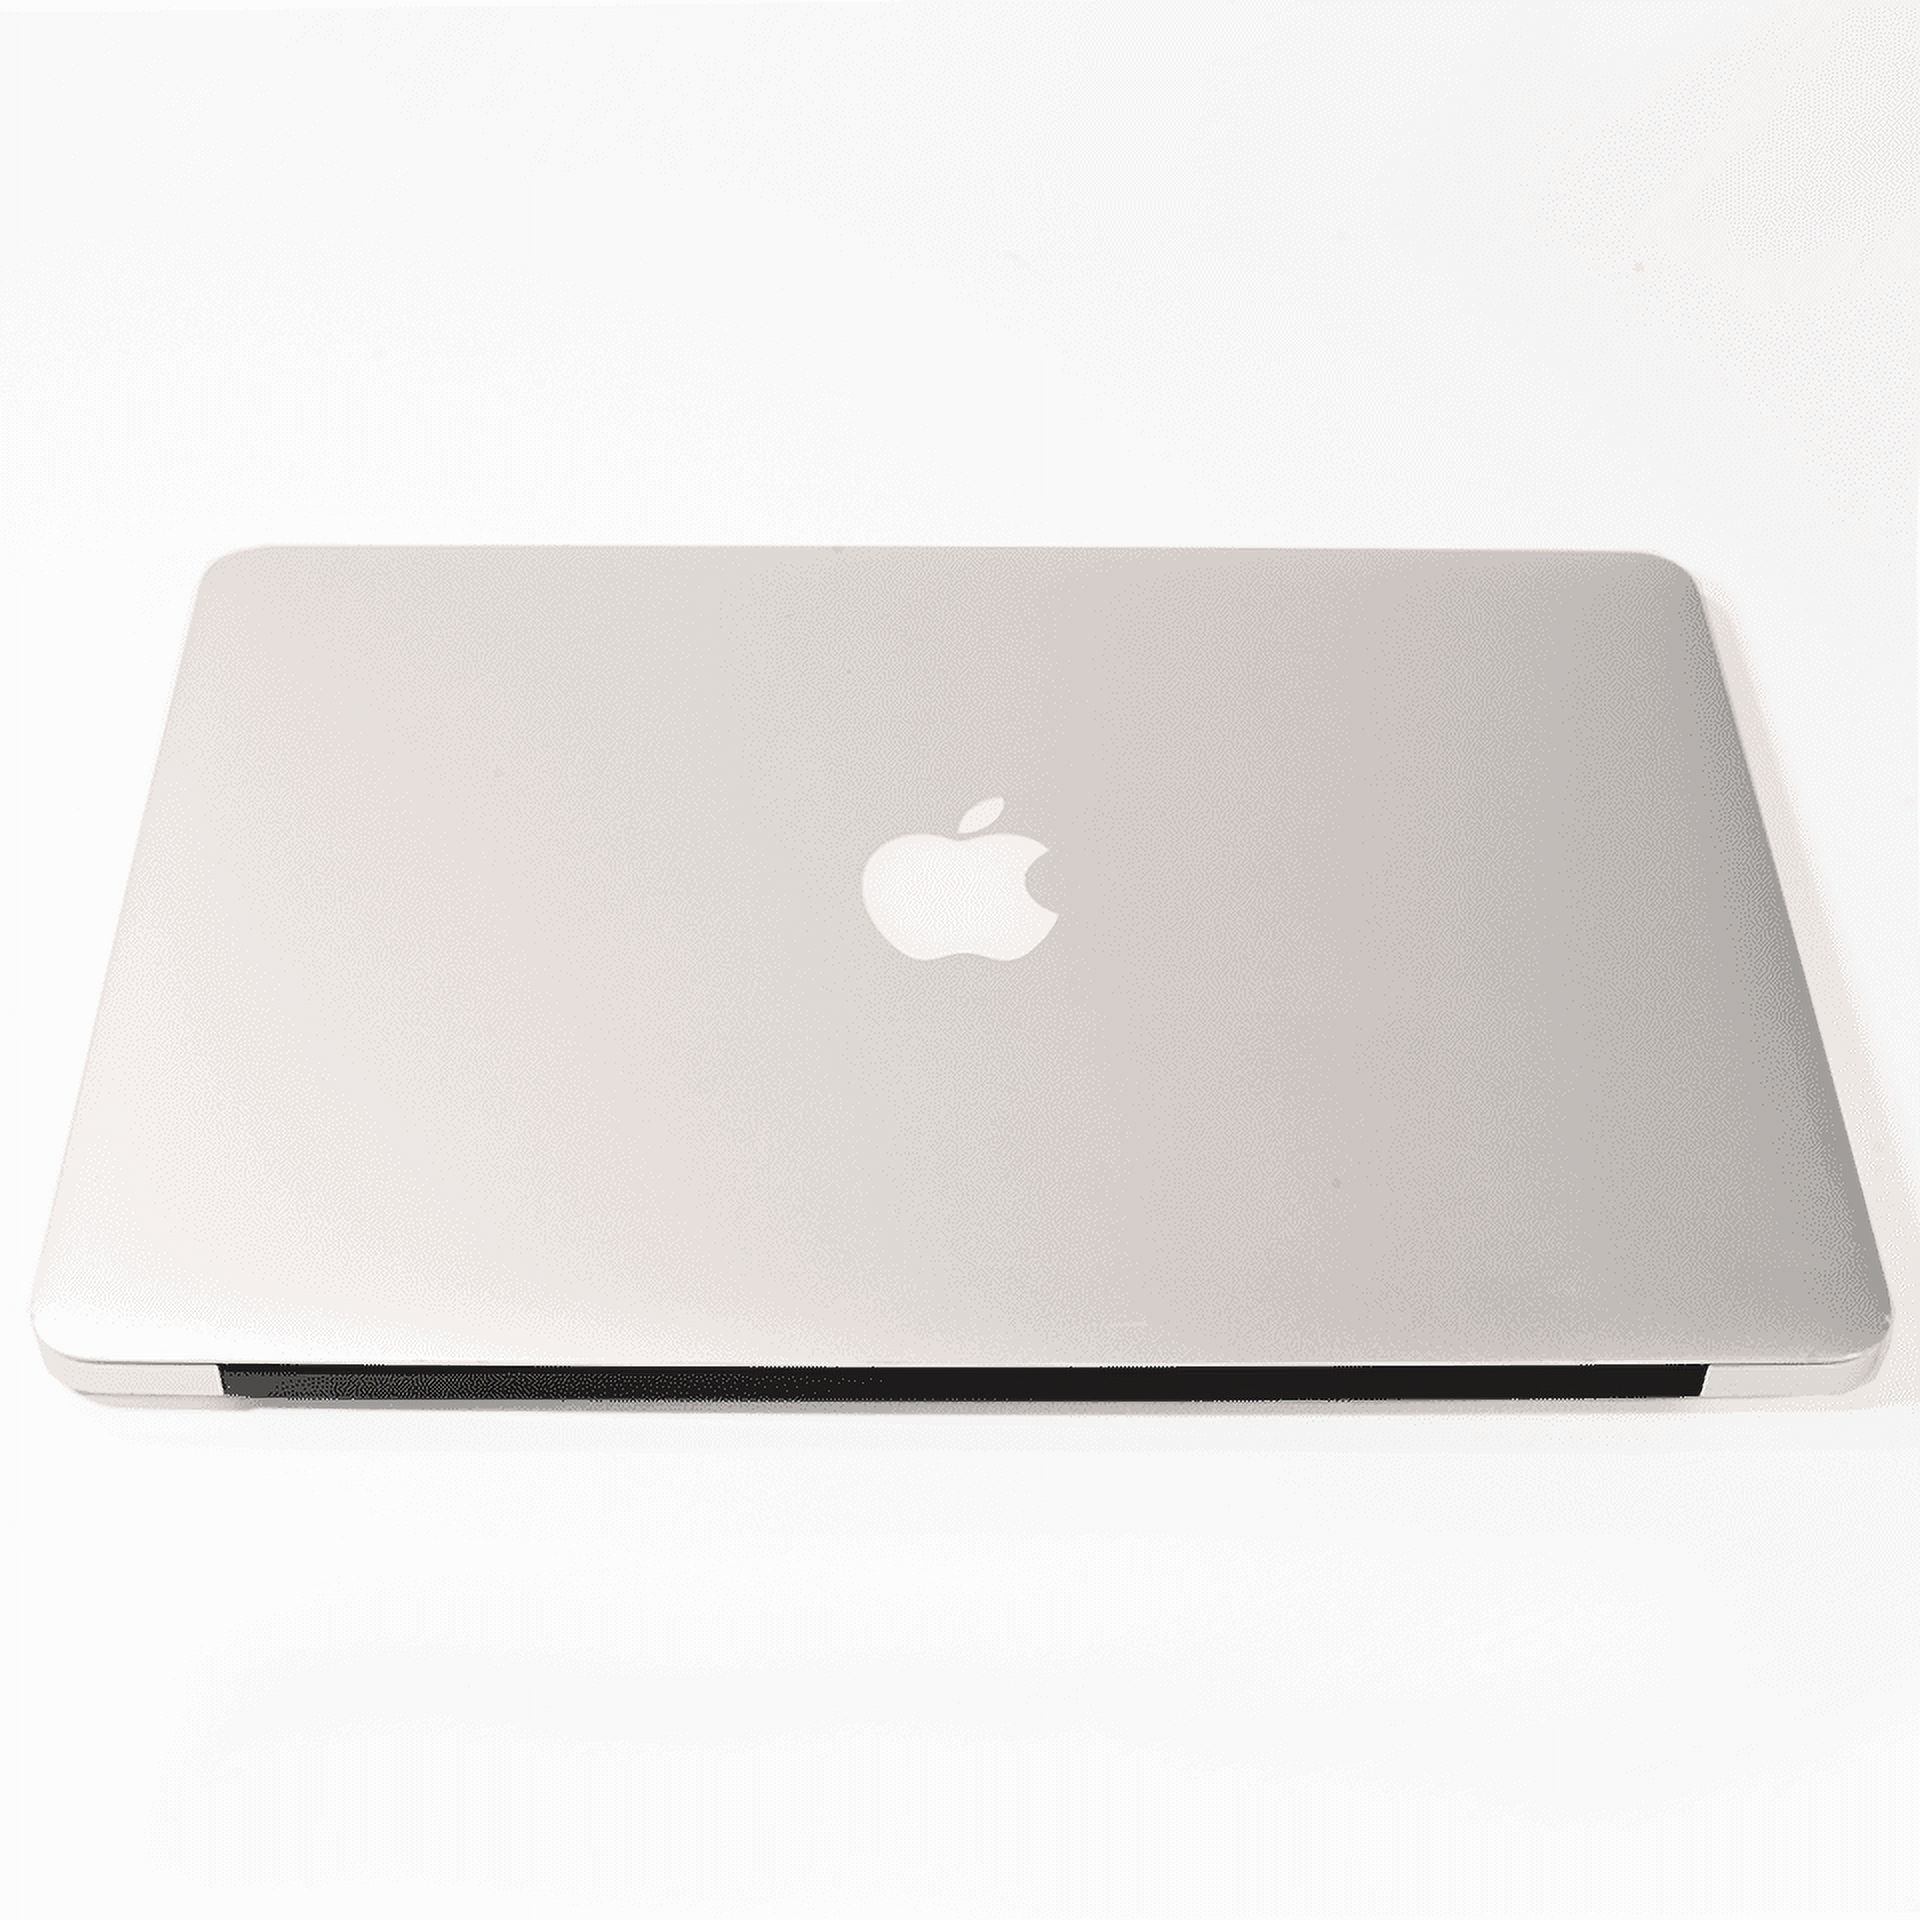 Restored 13" Apple MacBook Air 1.7GHz Dual Core i7 8GB Memory / 128GB SSD Turbo Boost to 3.3GHz (Refurbished) - image 1 of 4